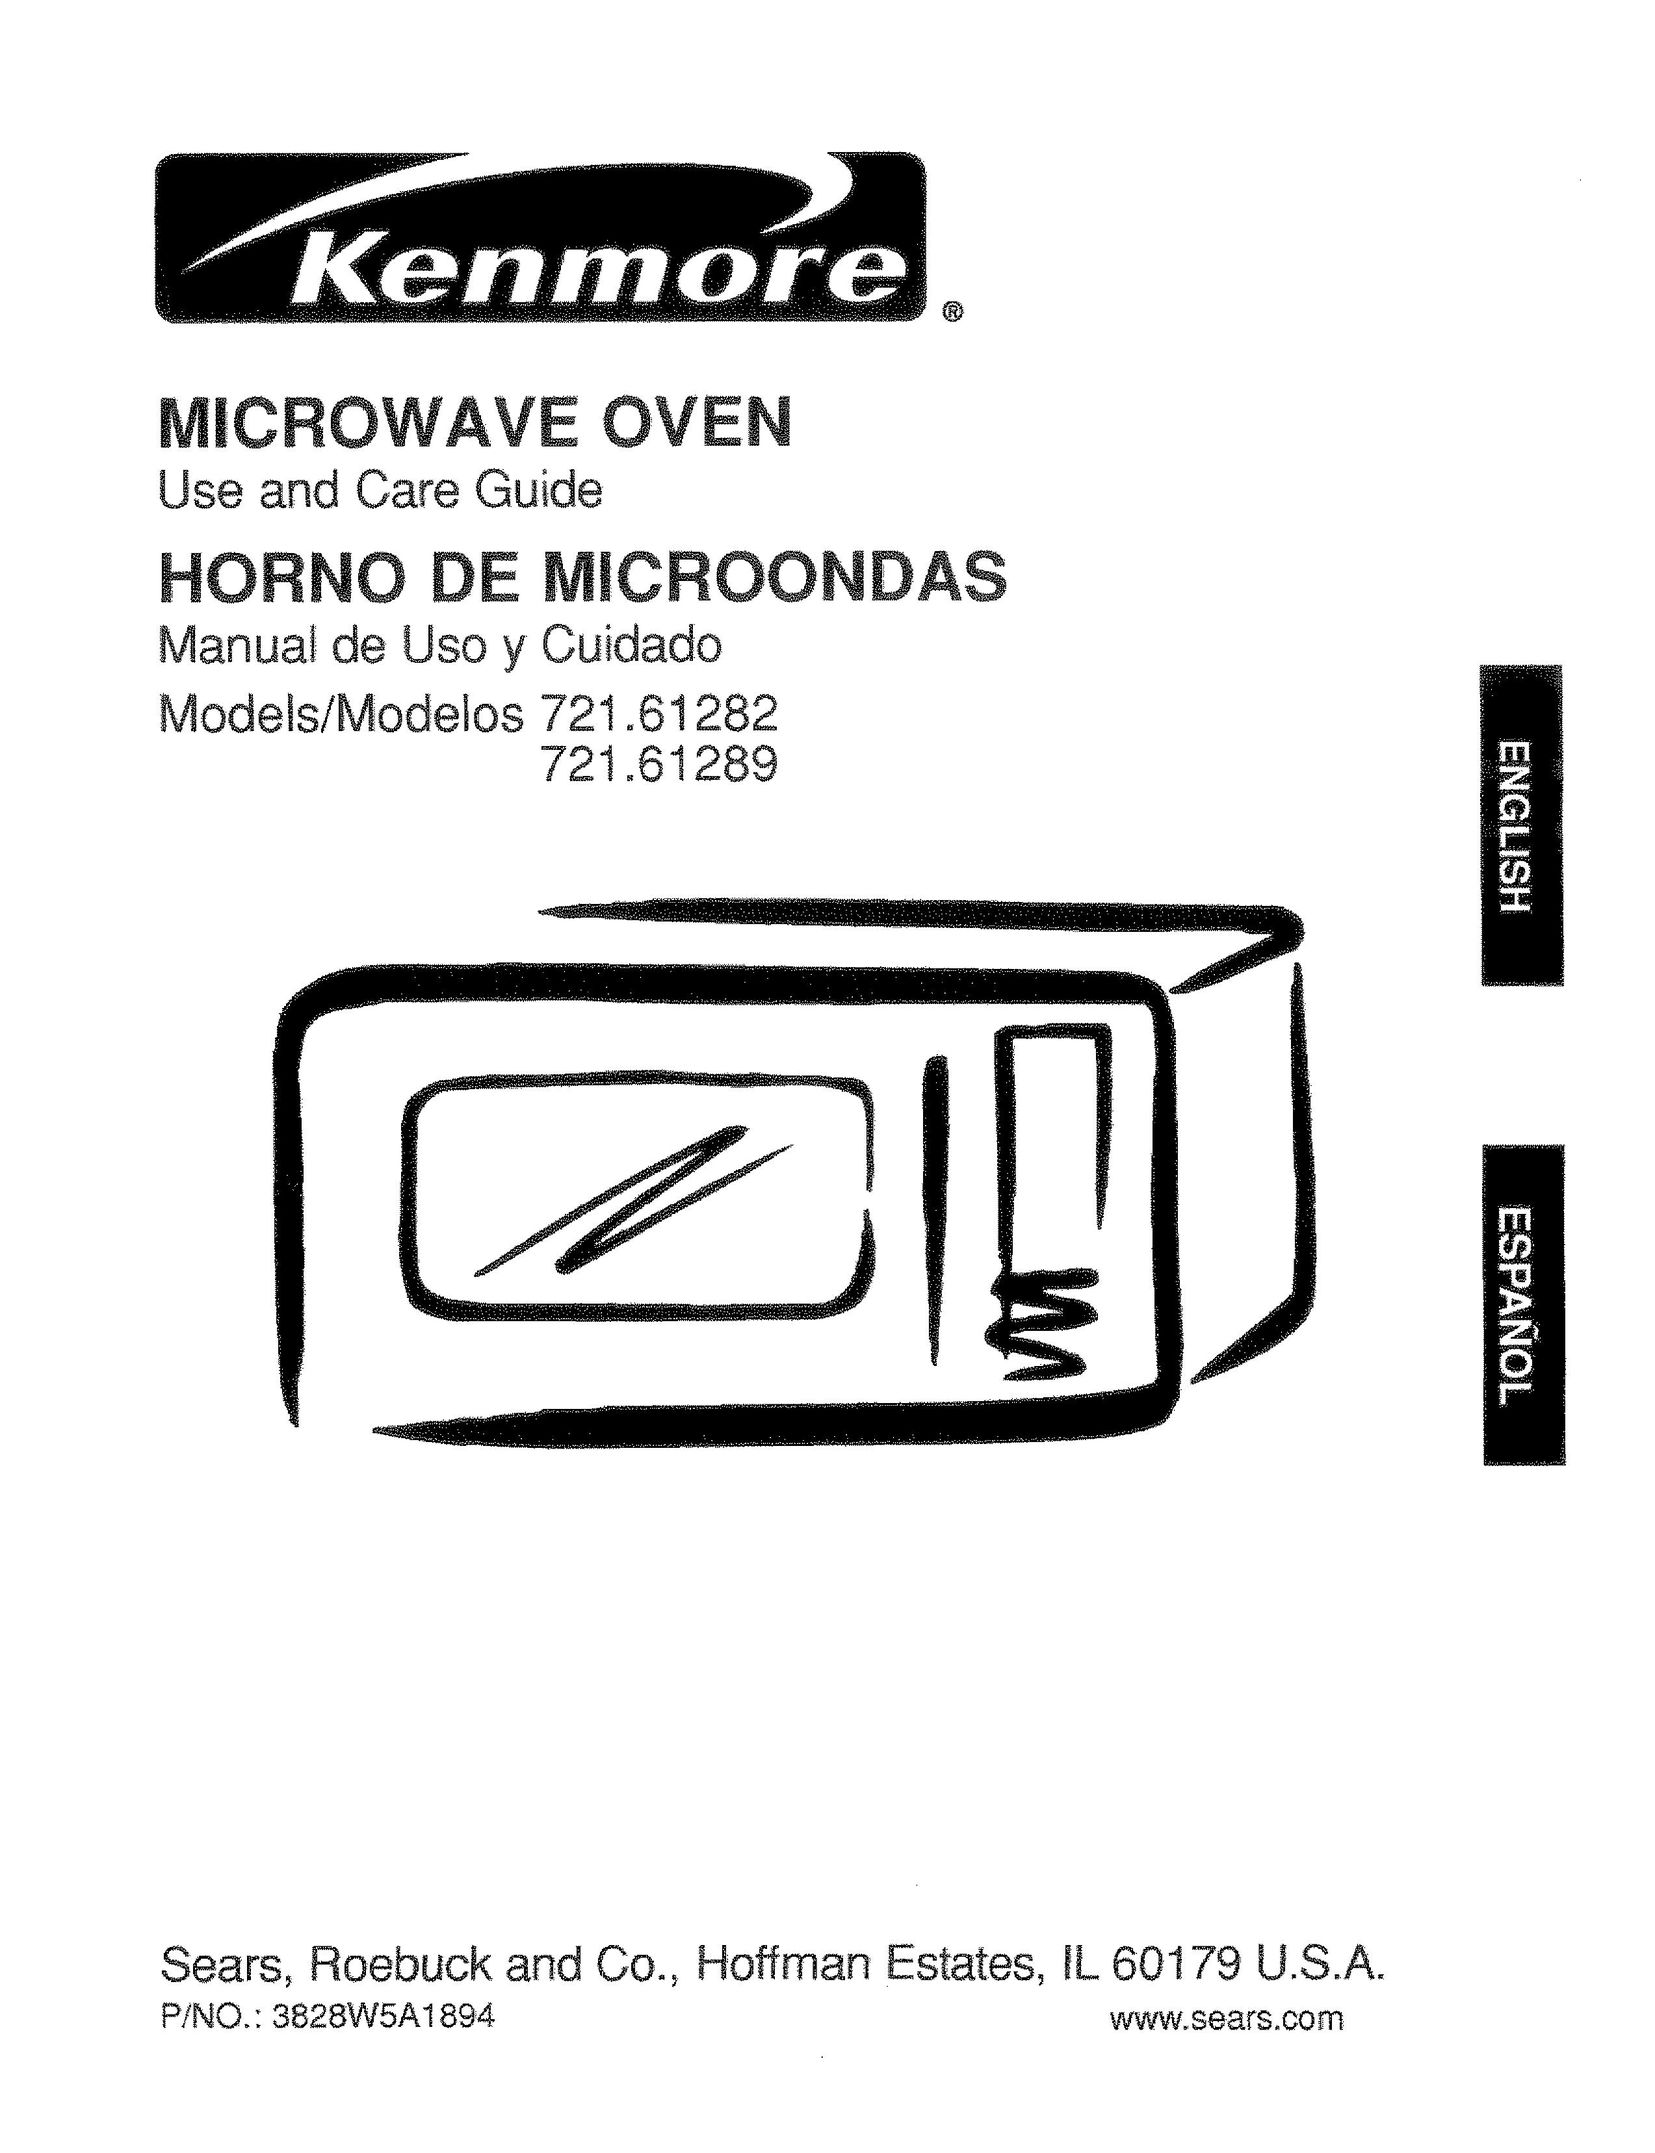 Kenmore 721.61289 Microwave Oven User Manual